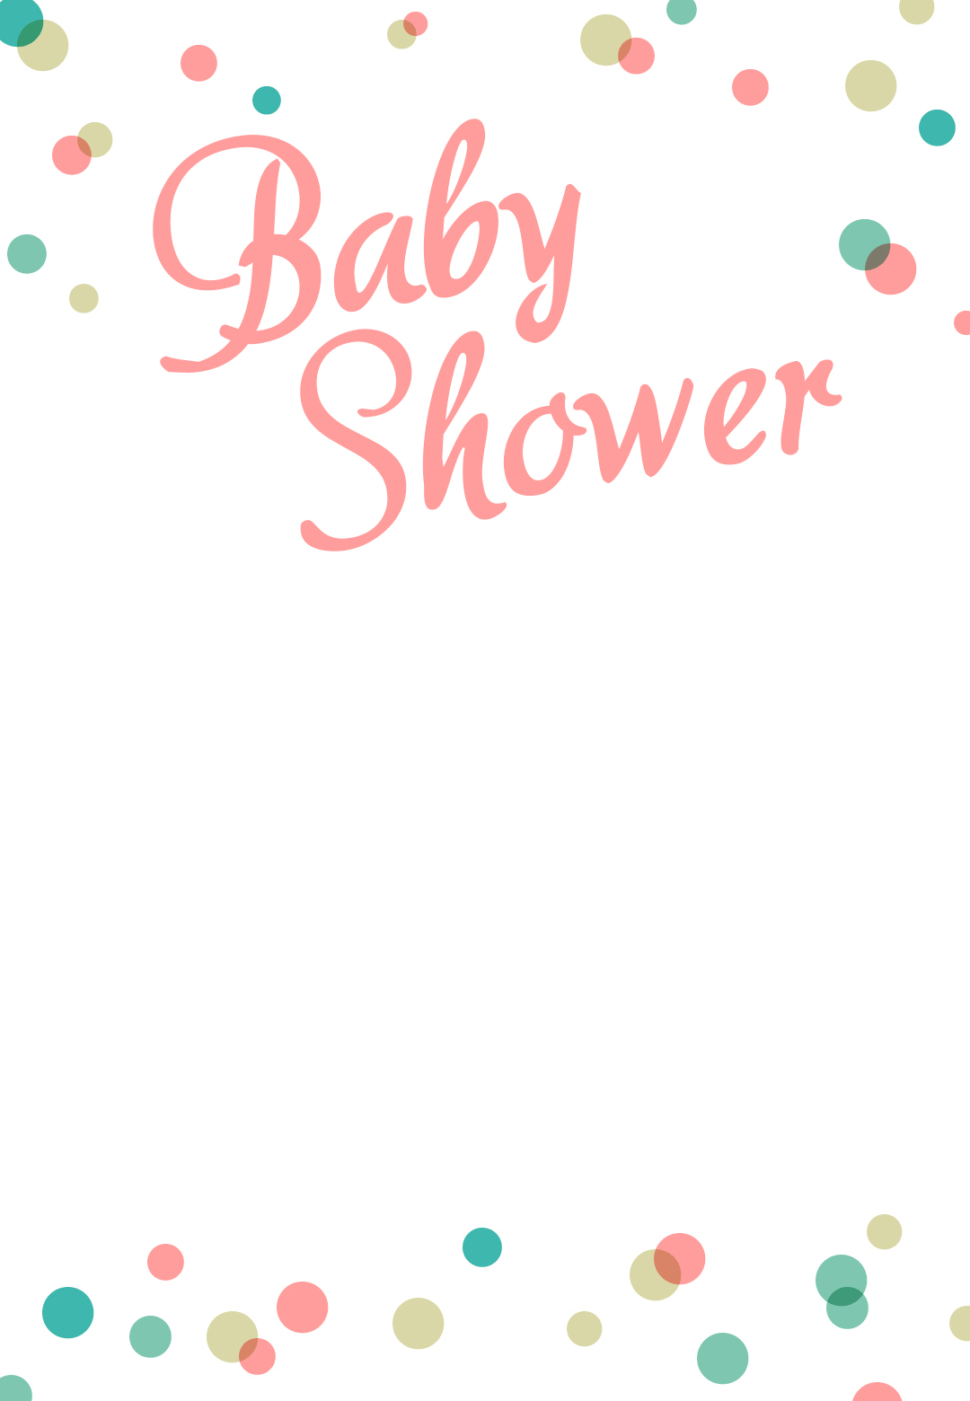 Medium Size of Baby Shower:sturdy Baby Shower Invitation Template Image Concepts Baby Shower Invitation Template Baby Shower Bingo Baby Shower Accessories Arreglos Para Baby Shower Baby Shower Clip Art Dancing Dots Borders Free Printable Baby Shower Invitation